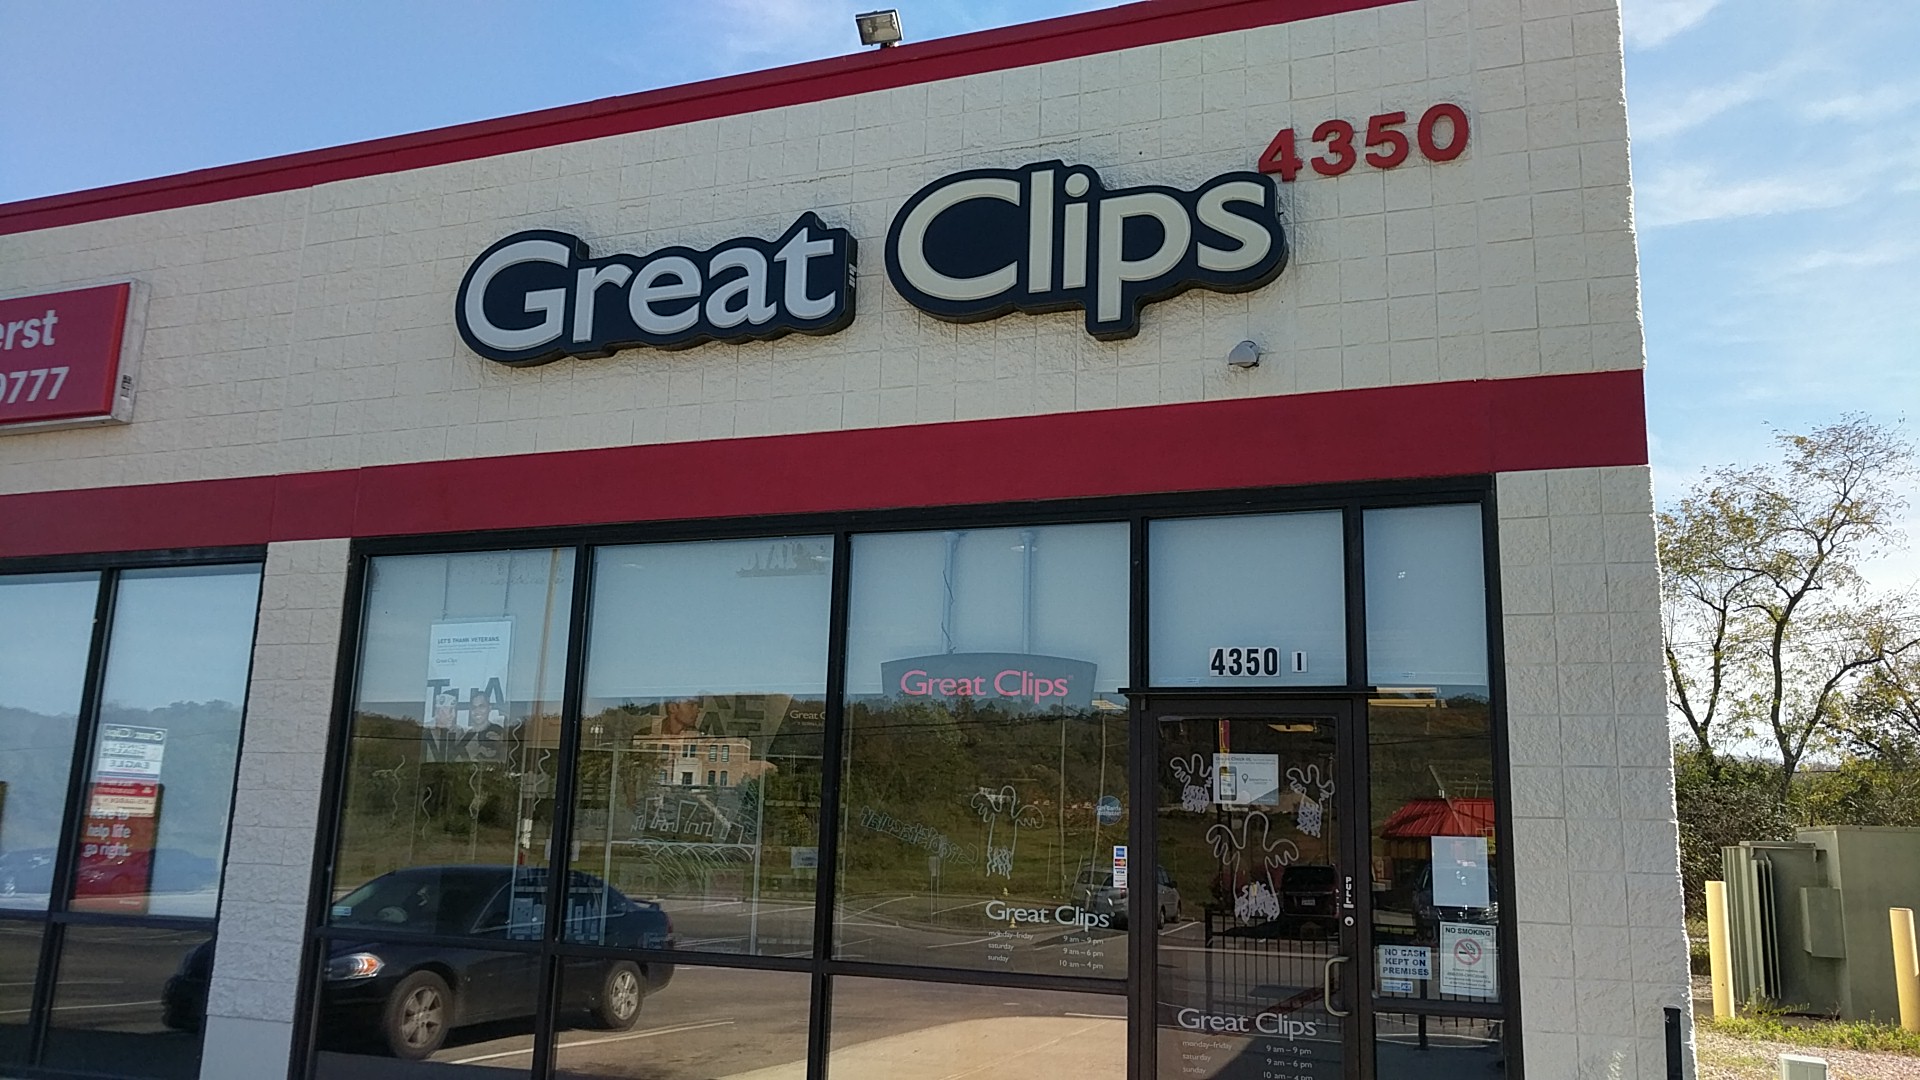 Great Clips 4350 OH-128 Ste I, Cleves Ohio 45002